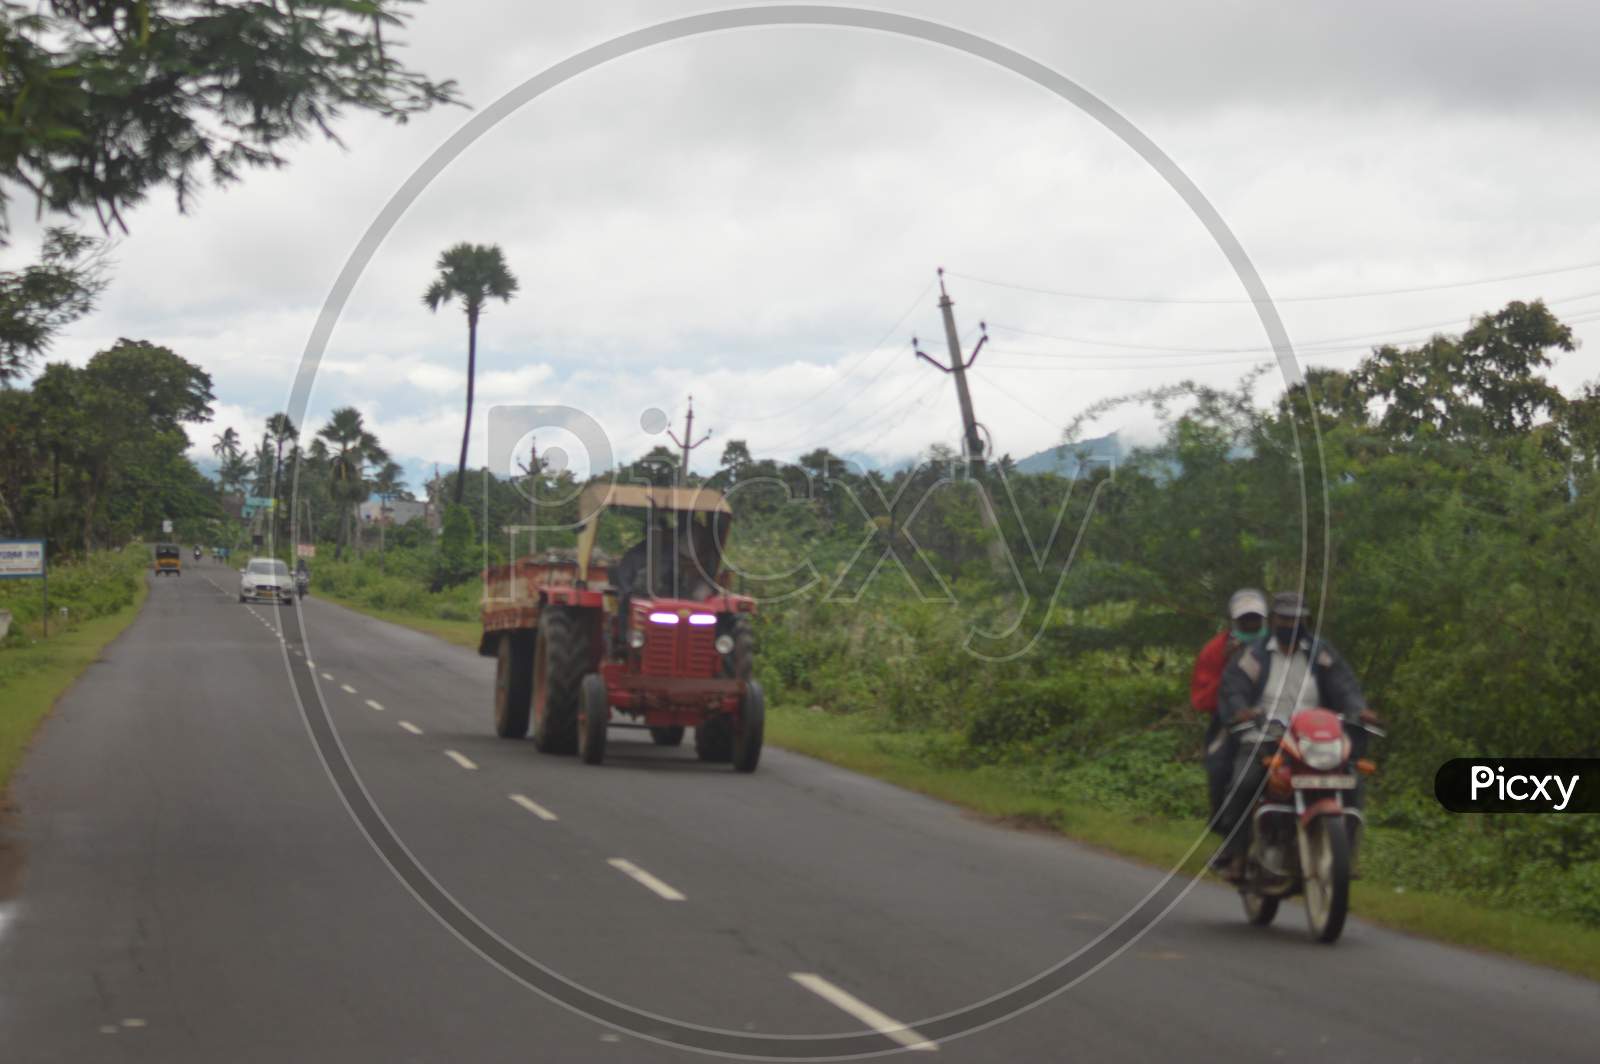 Indian village roads with tractor